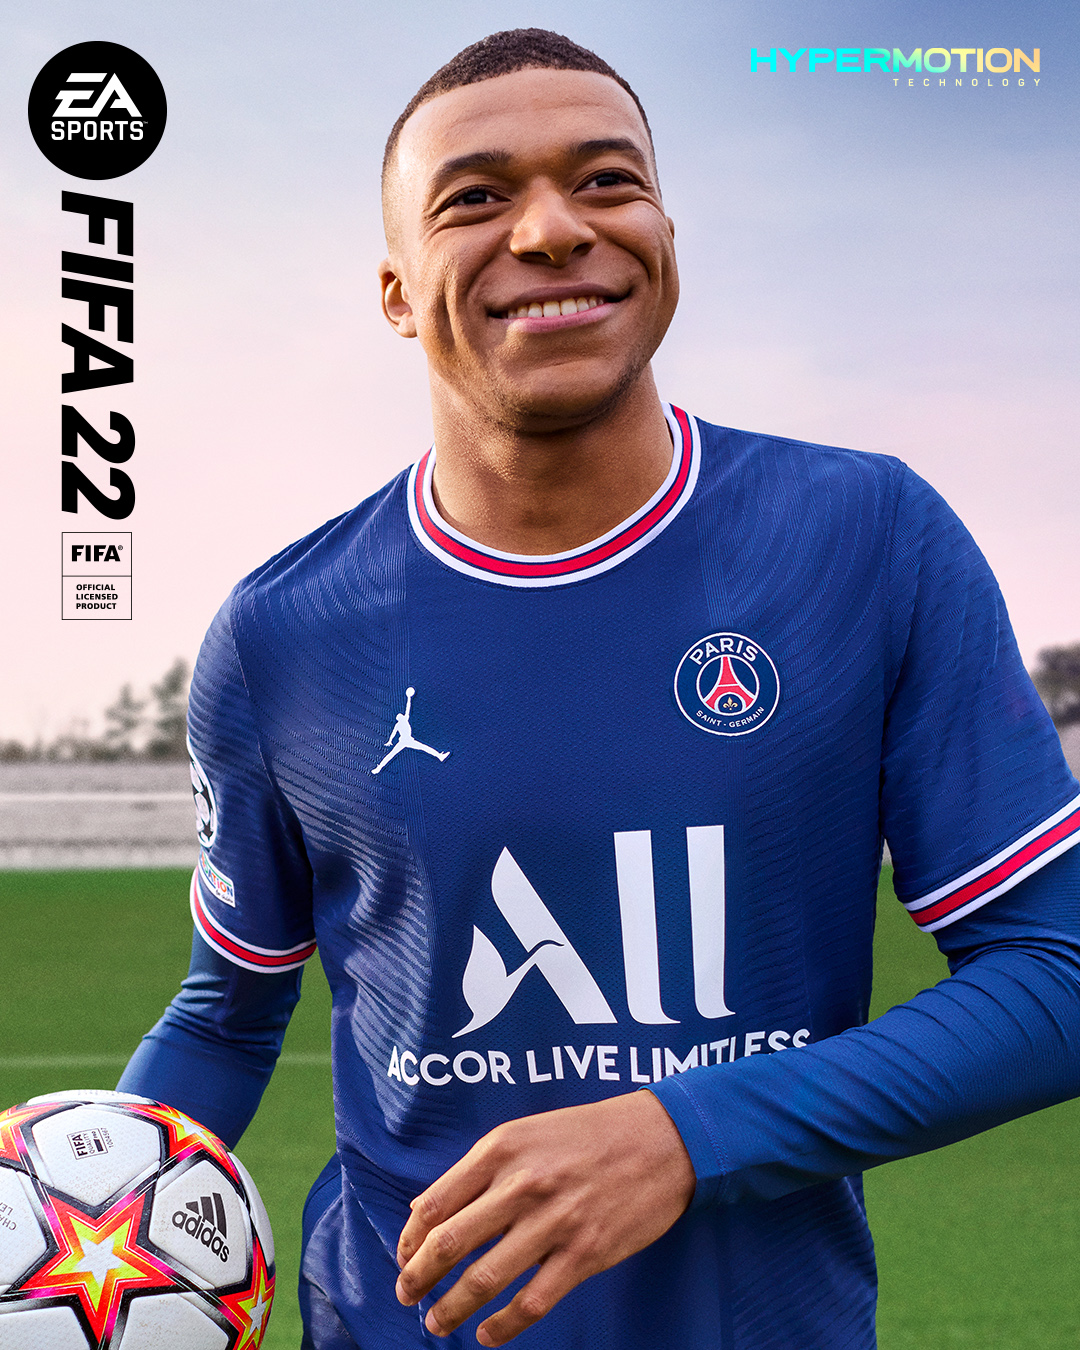 FIFA 22 coming October 1st